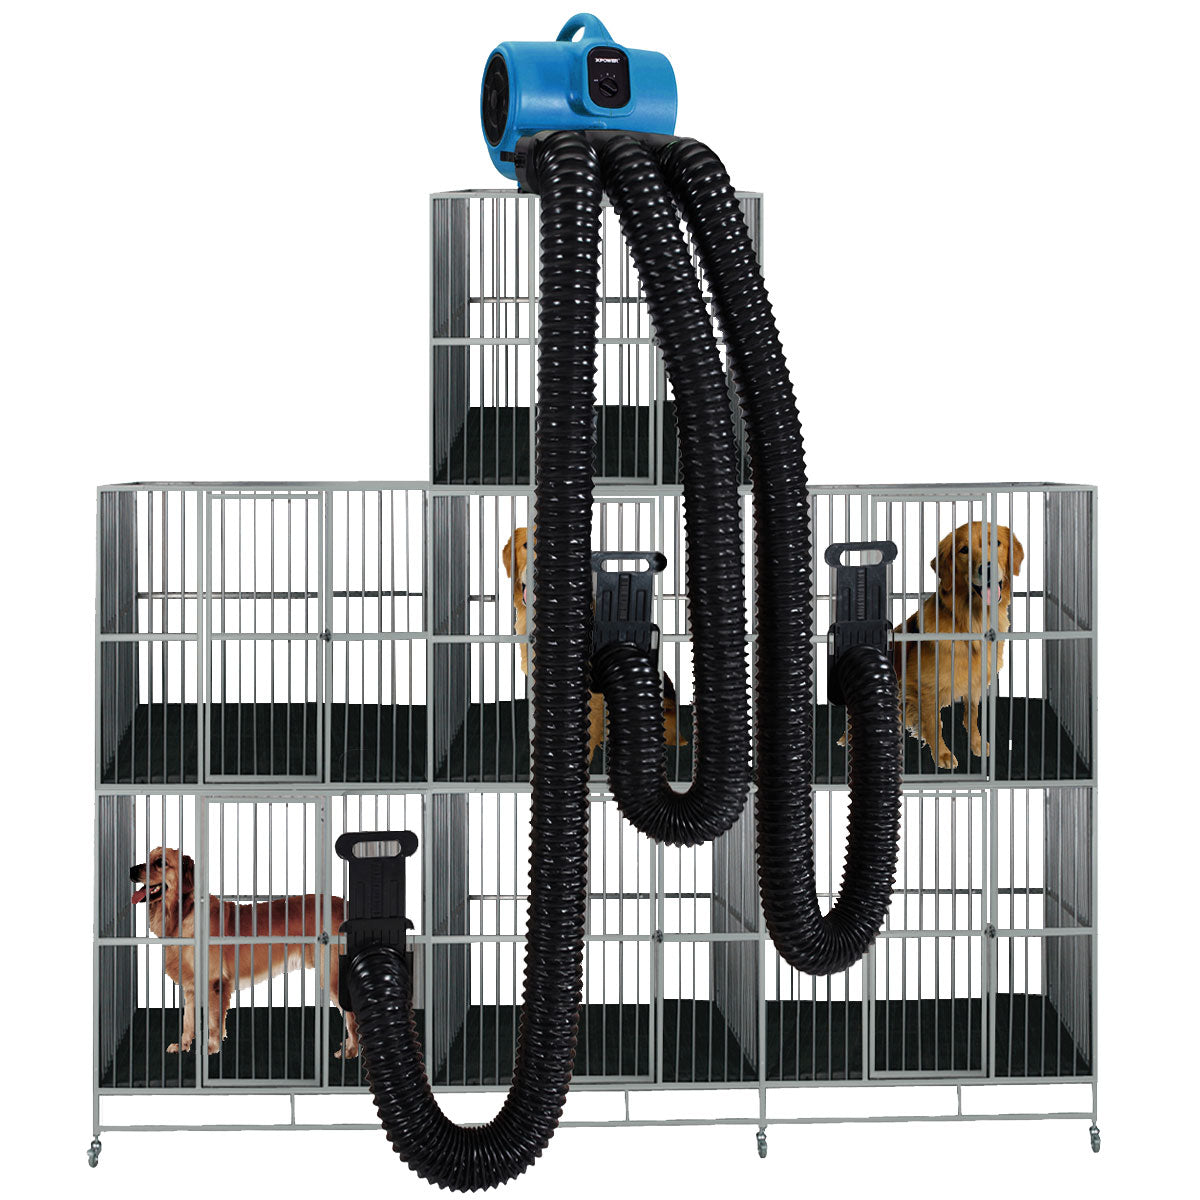 XPOWER X-800TF+MDK Cage Dryer with Multi-Drying Hose Kit